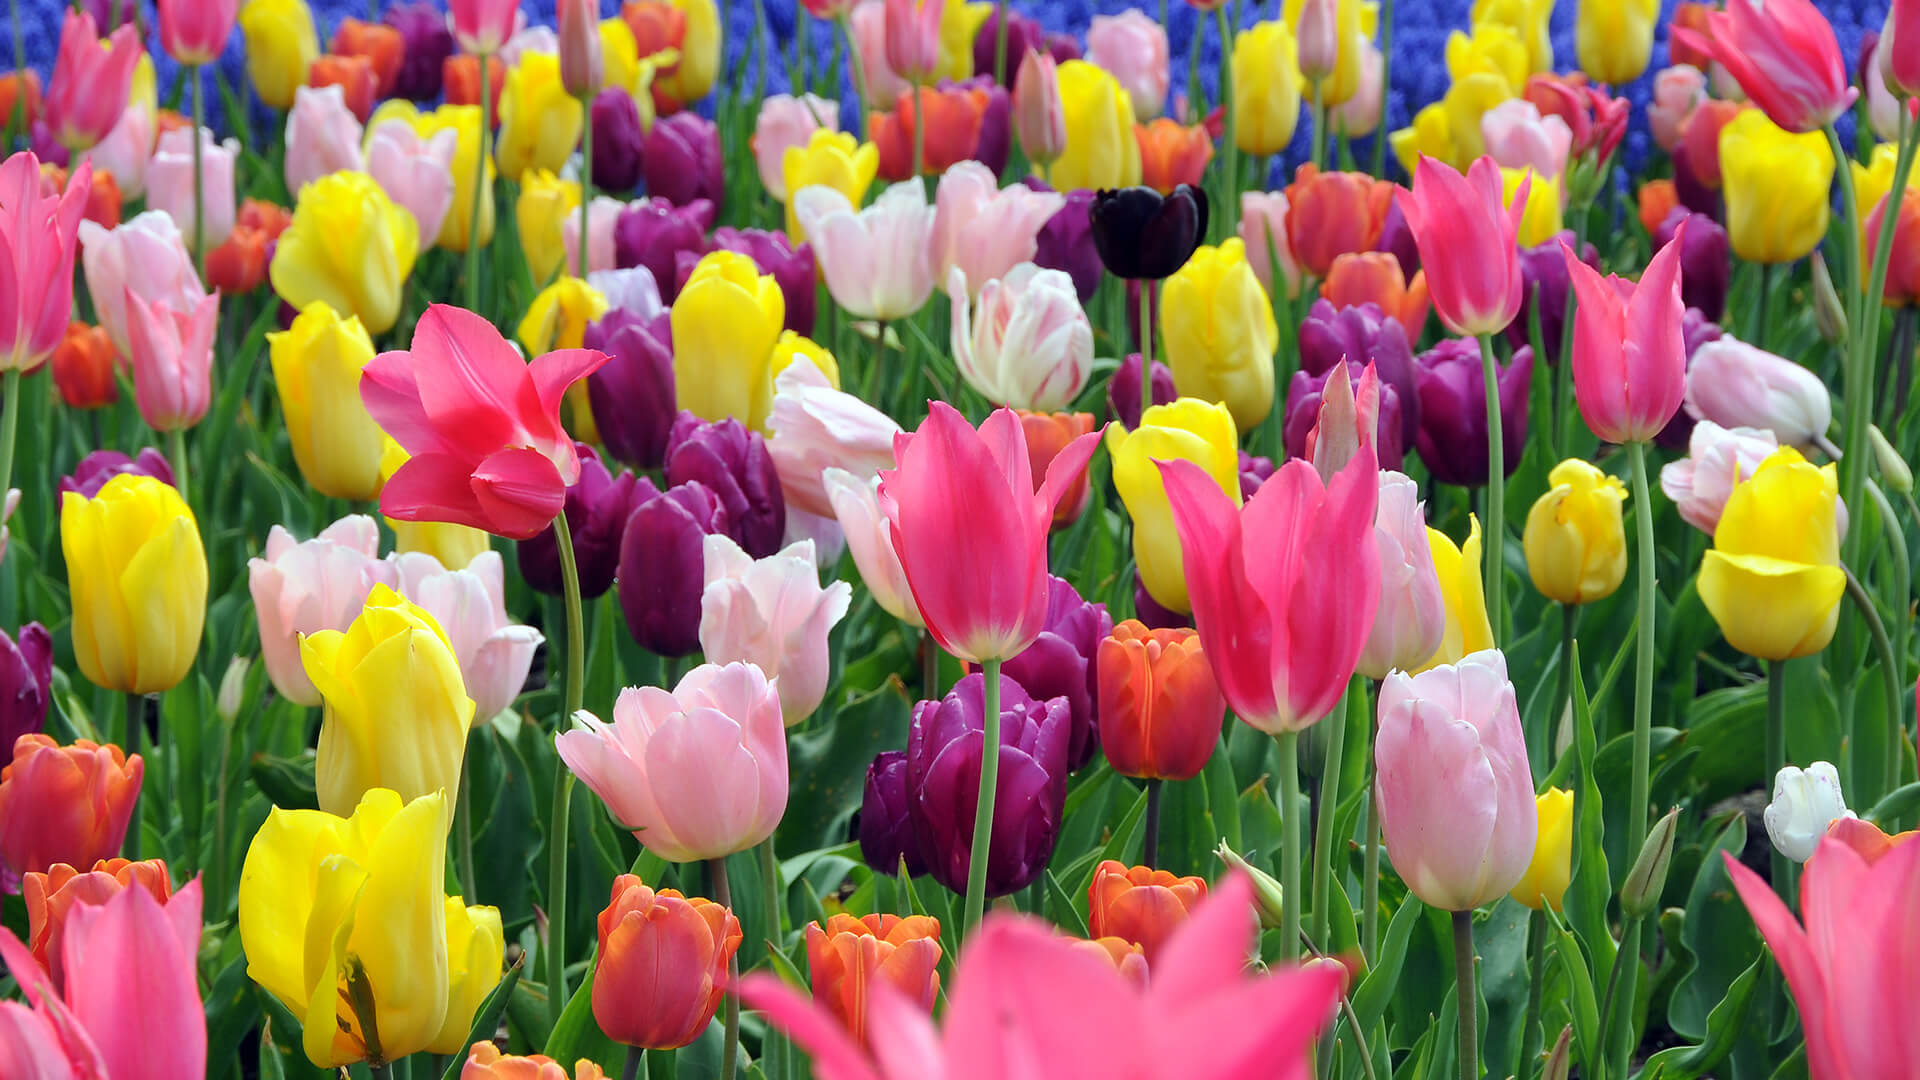 American Tulip Day - Don't miss the chance to pick your own!